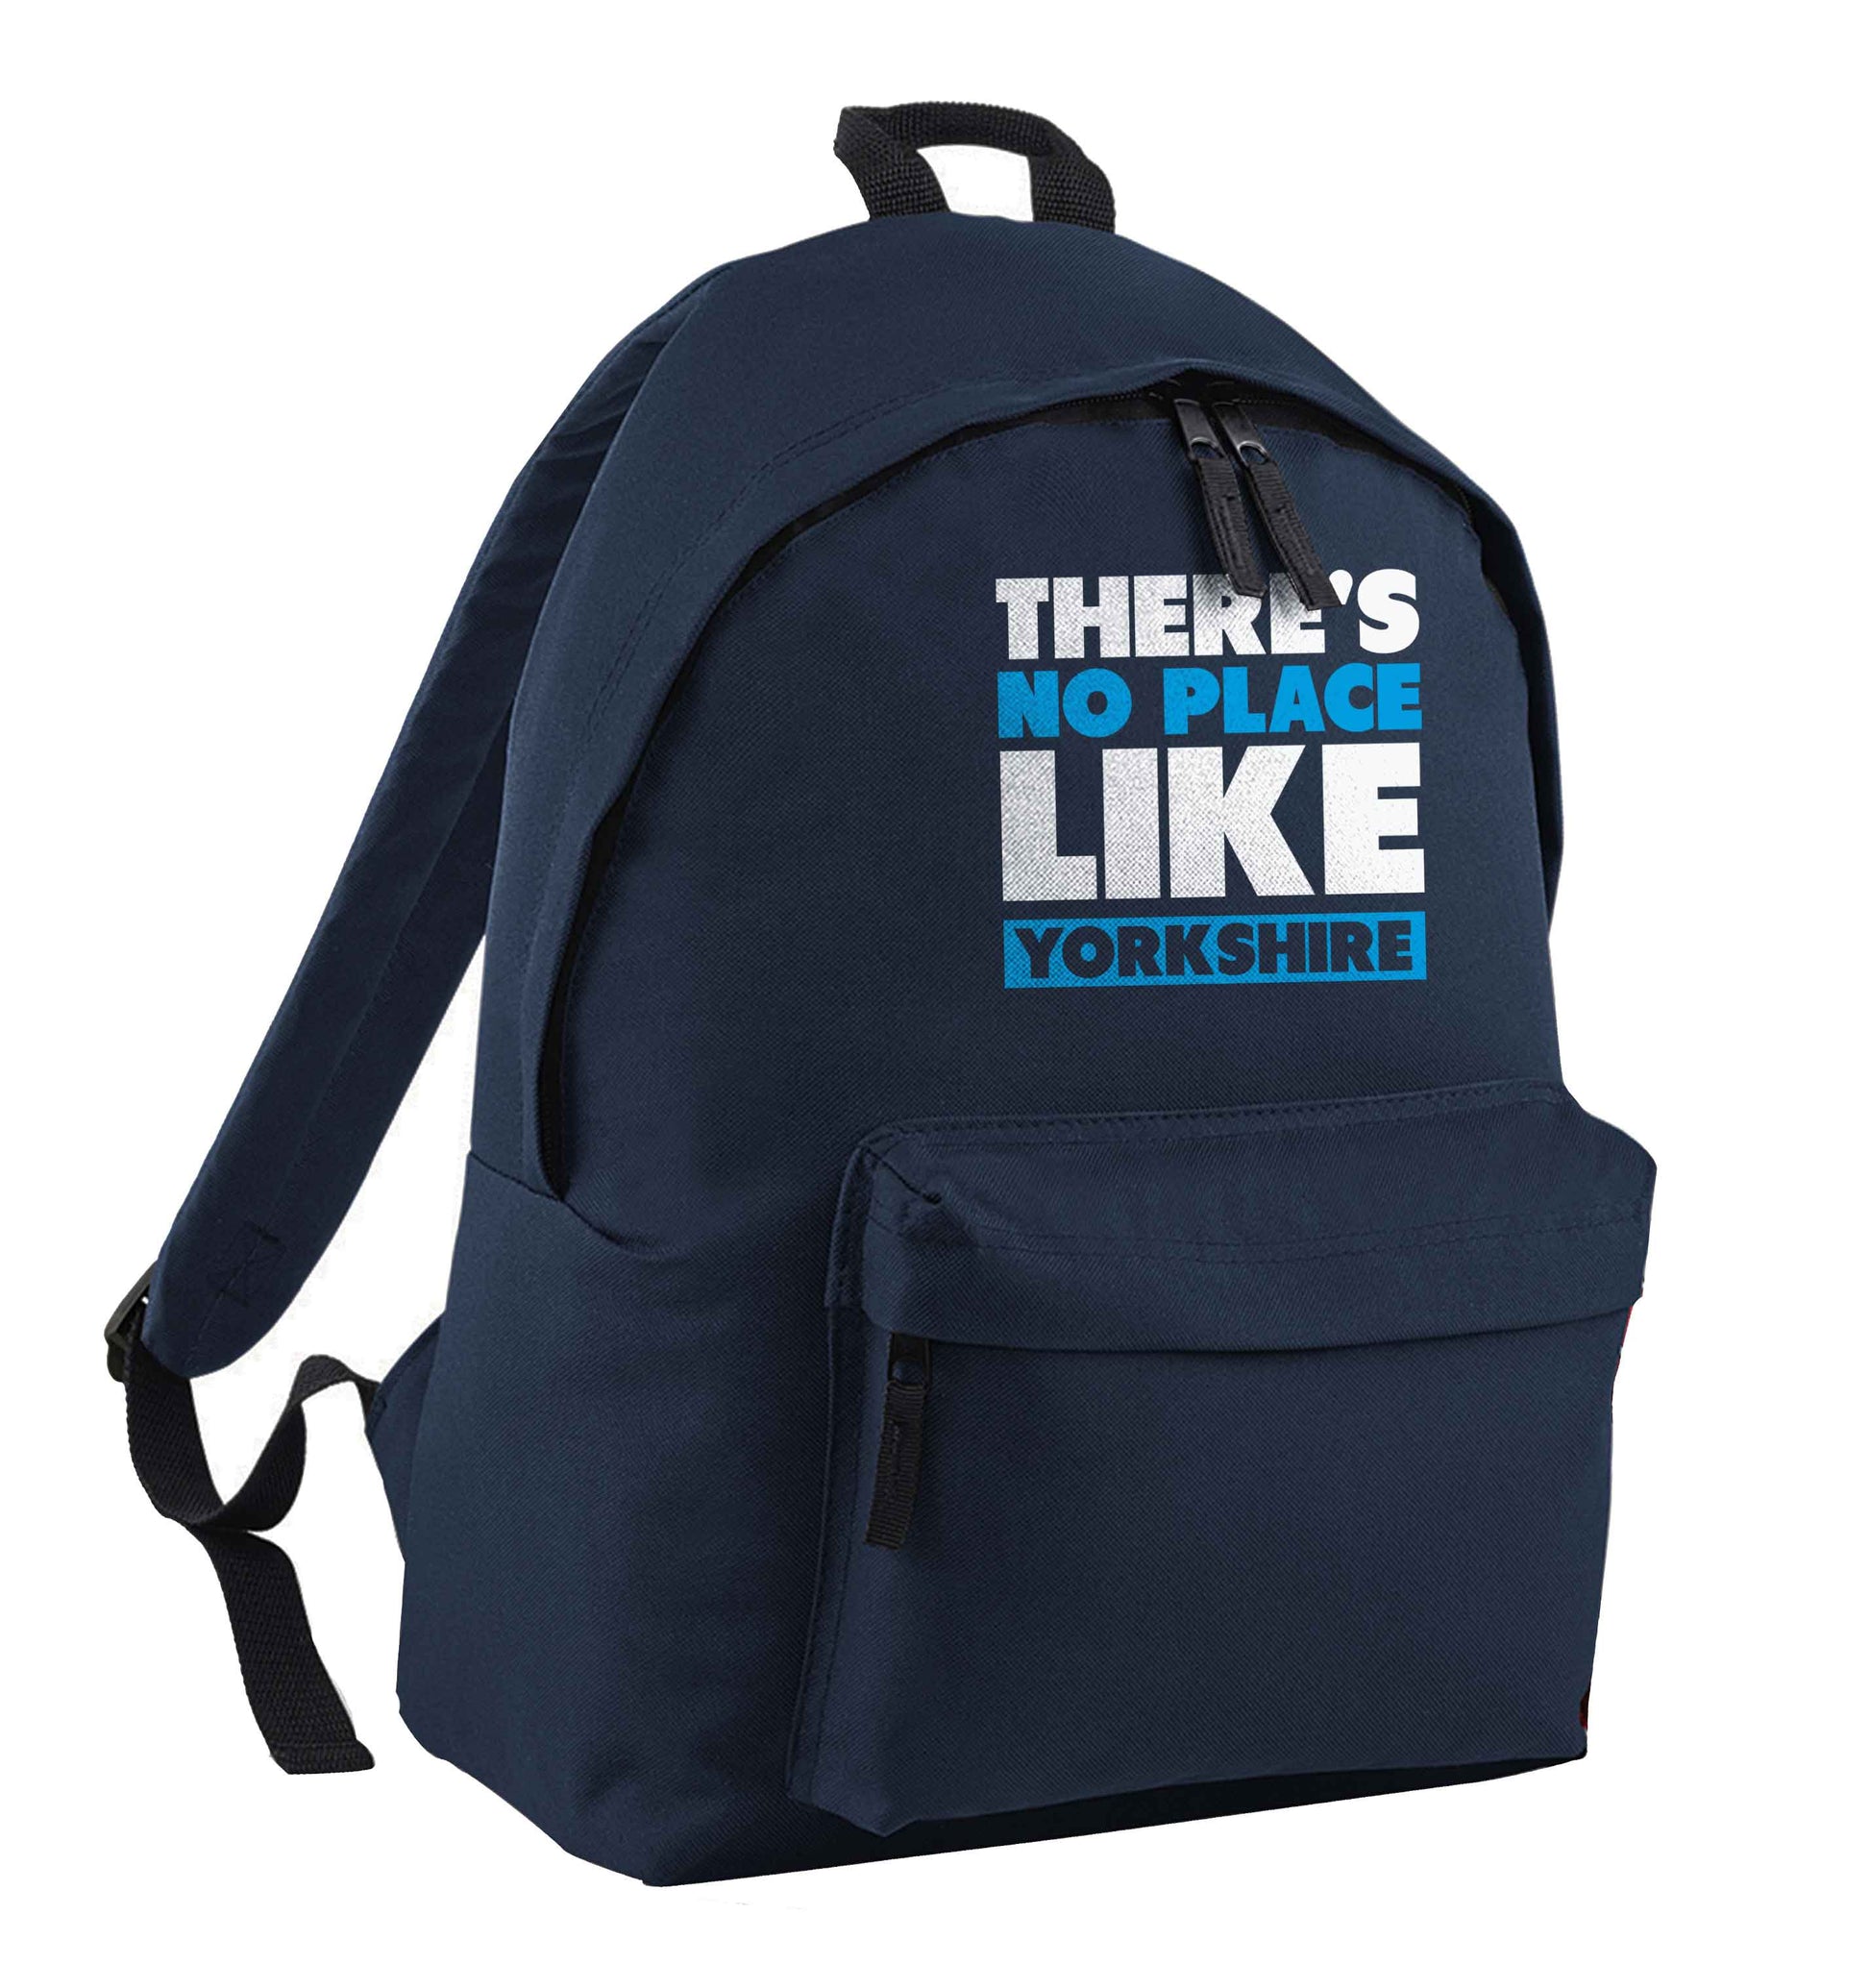 There's no place like Yorkshire navy children's backpack